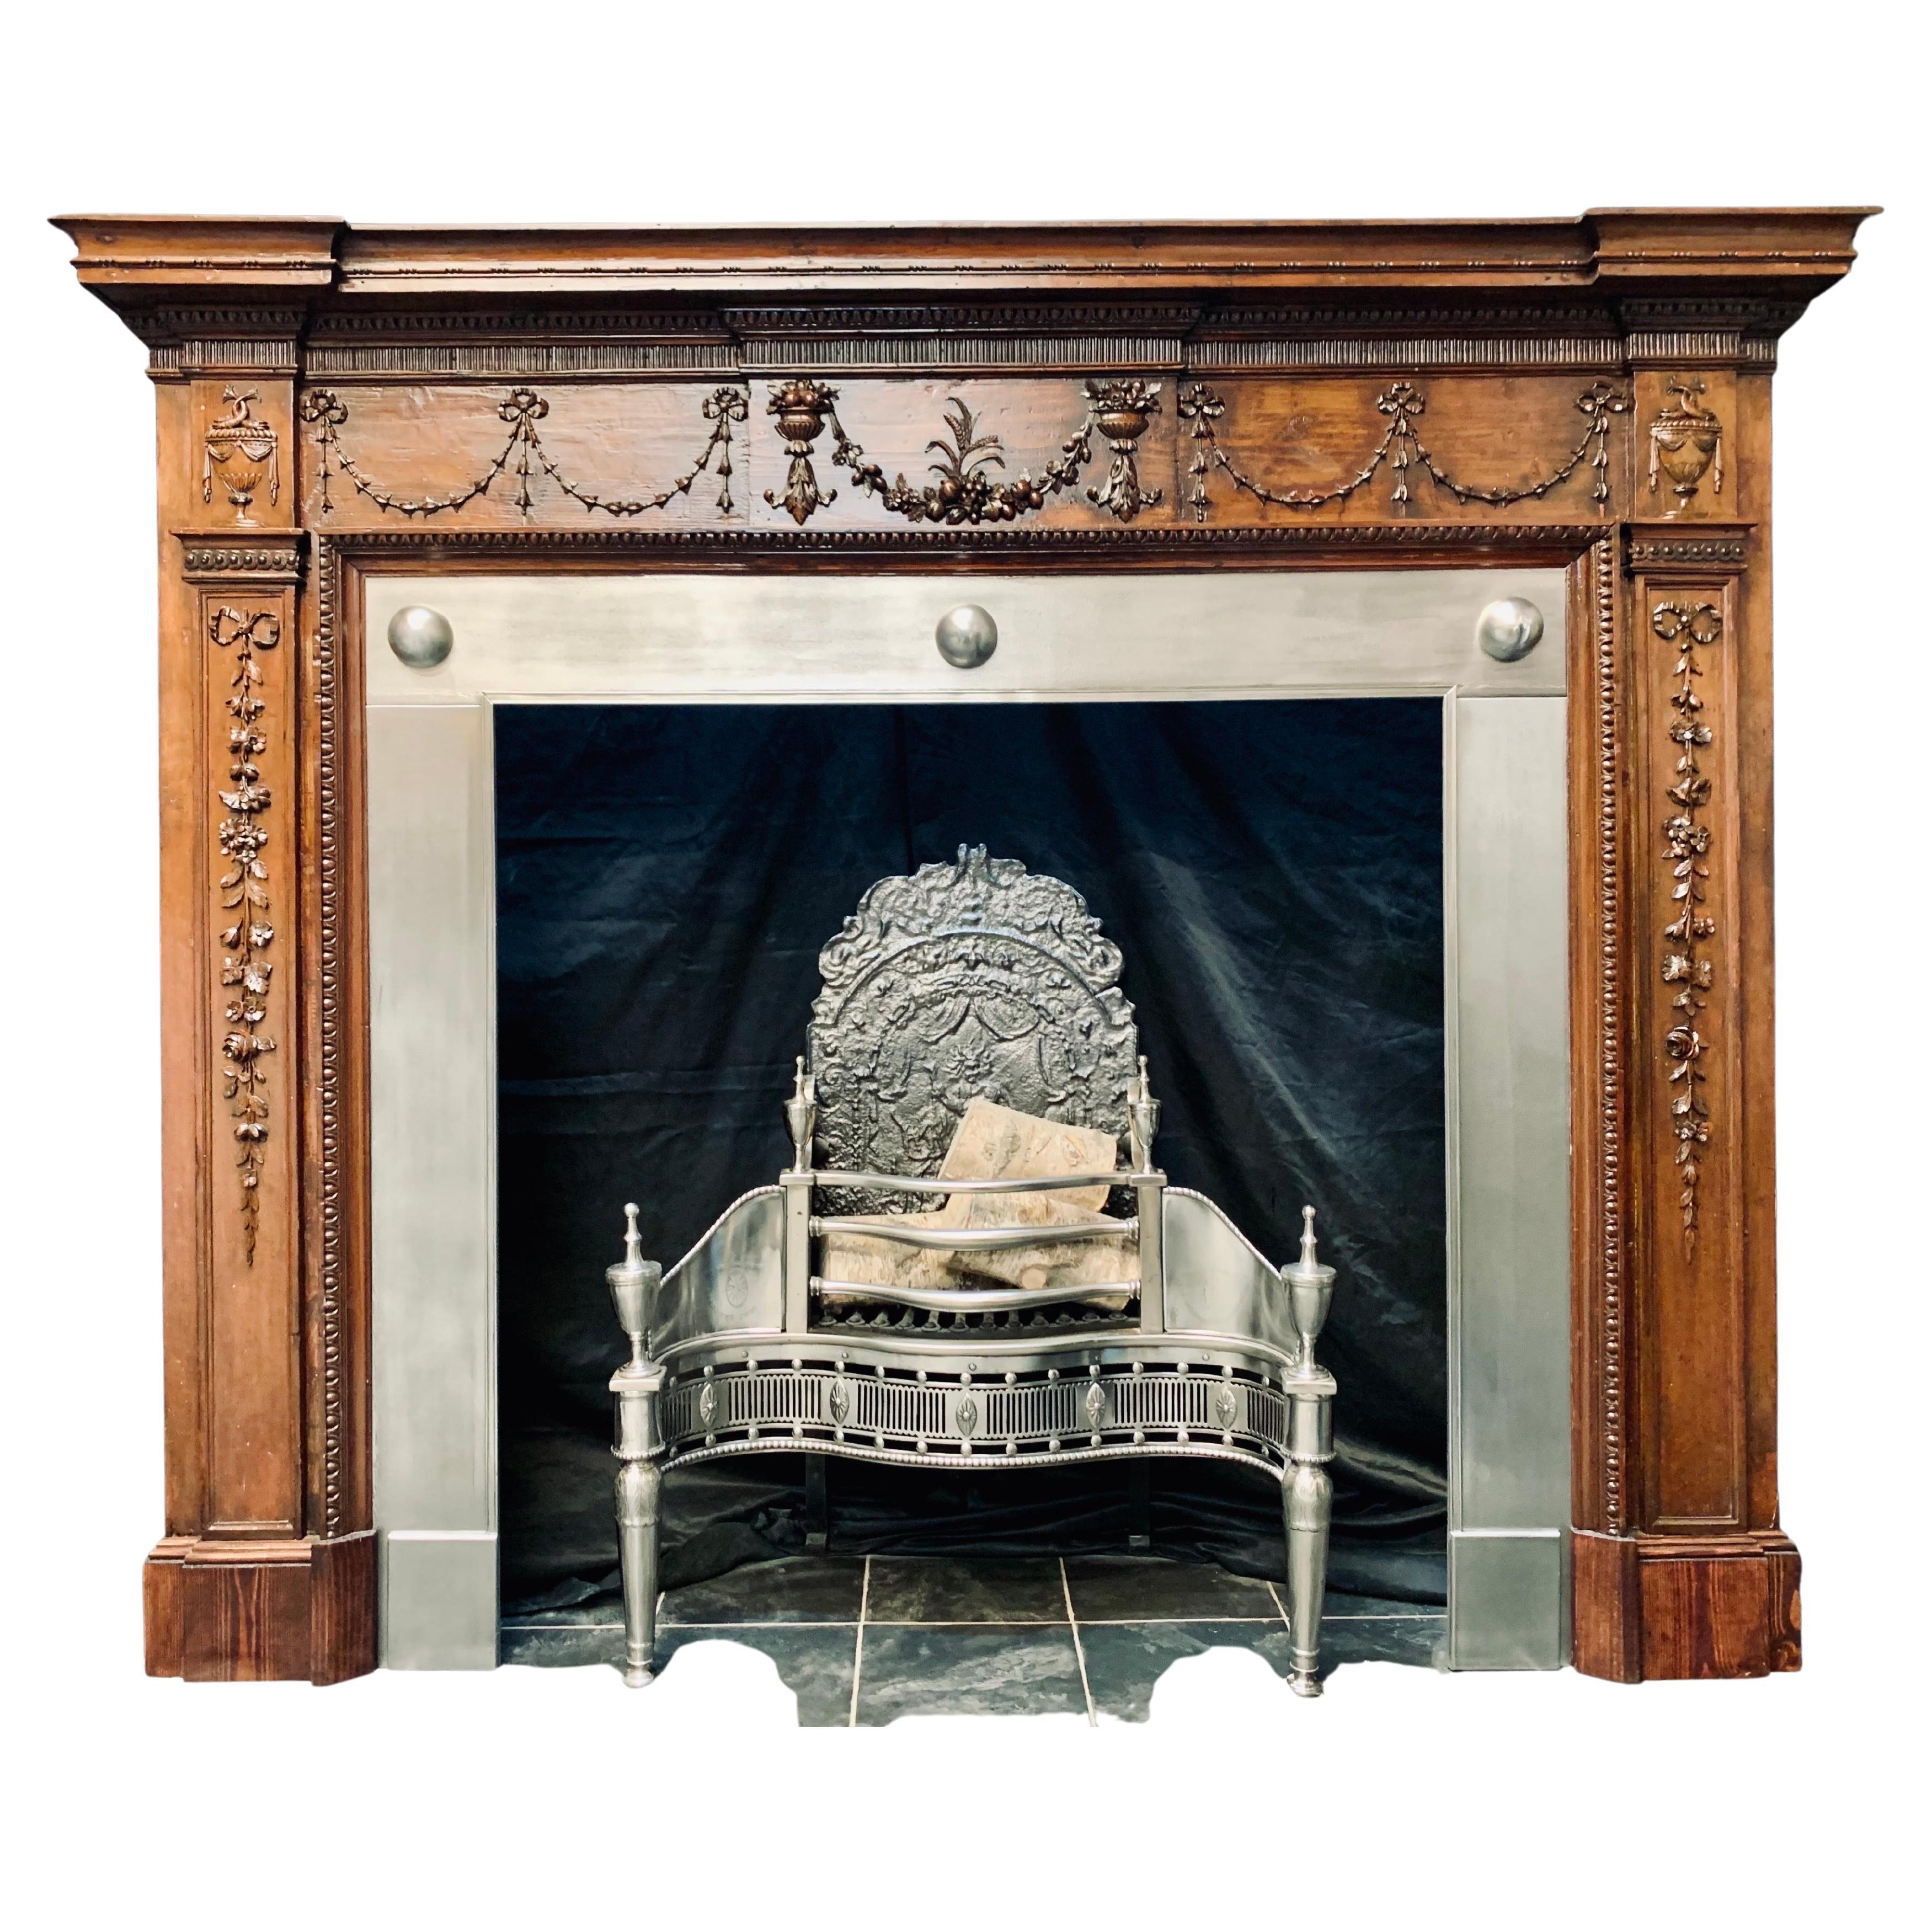 Grand Scottish Early 19th Century Carved Wooden Georgian Fireplace Surround